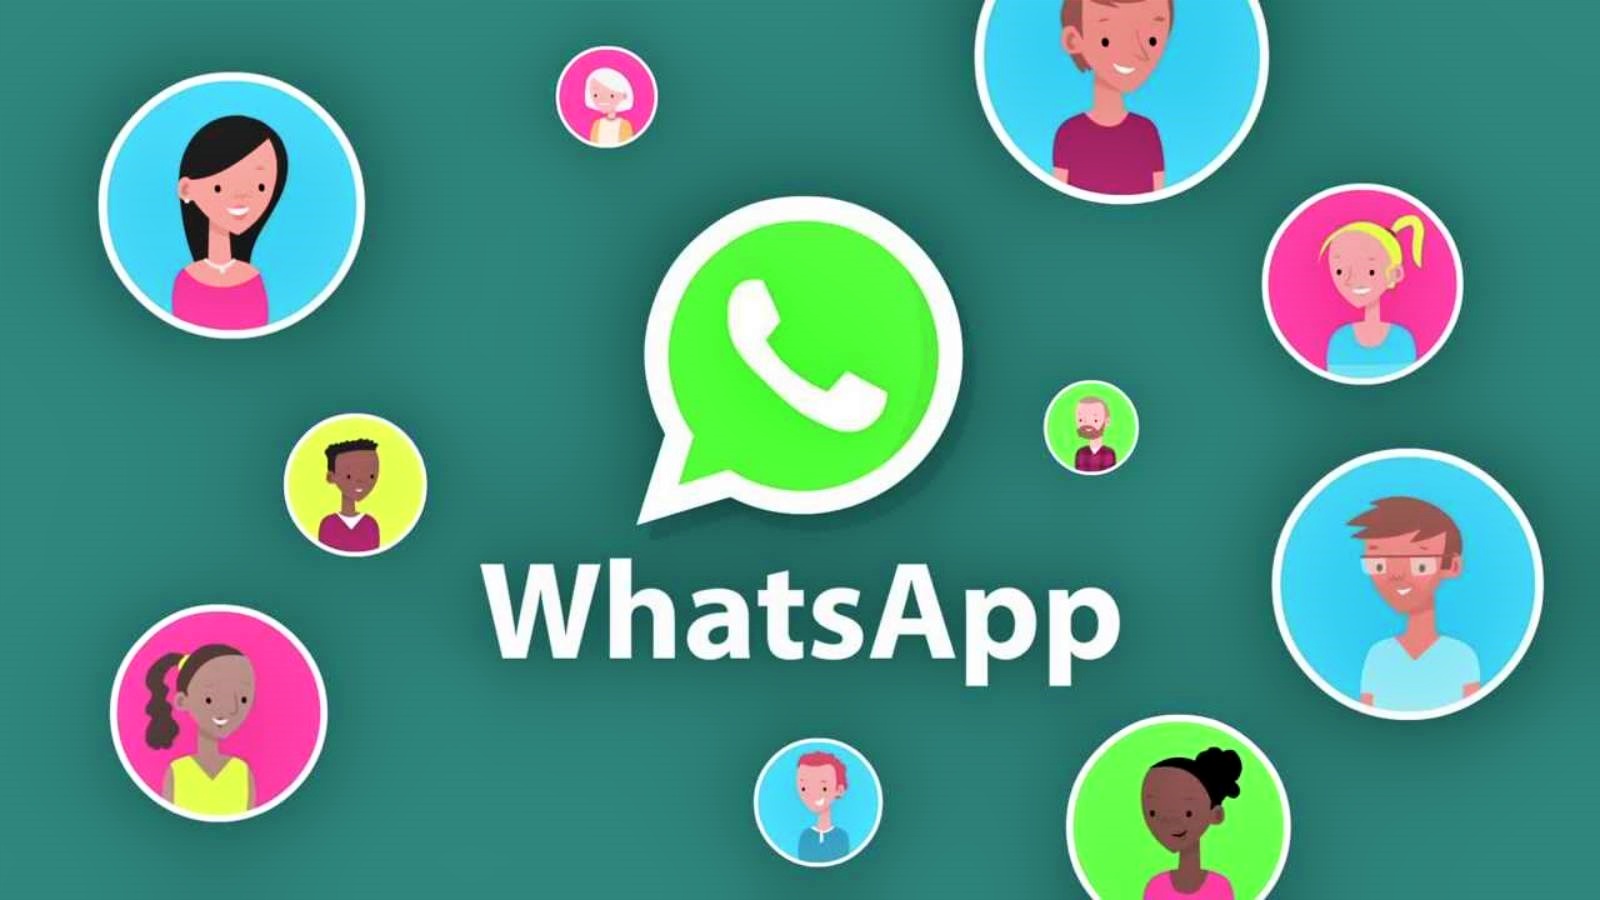 WhatsApp mesaje vocale story iphone android